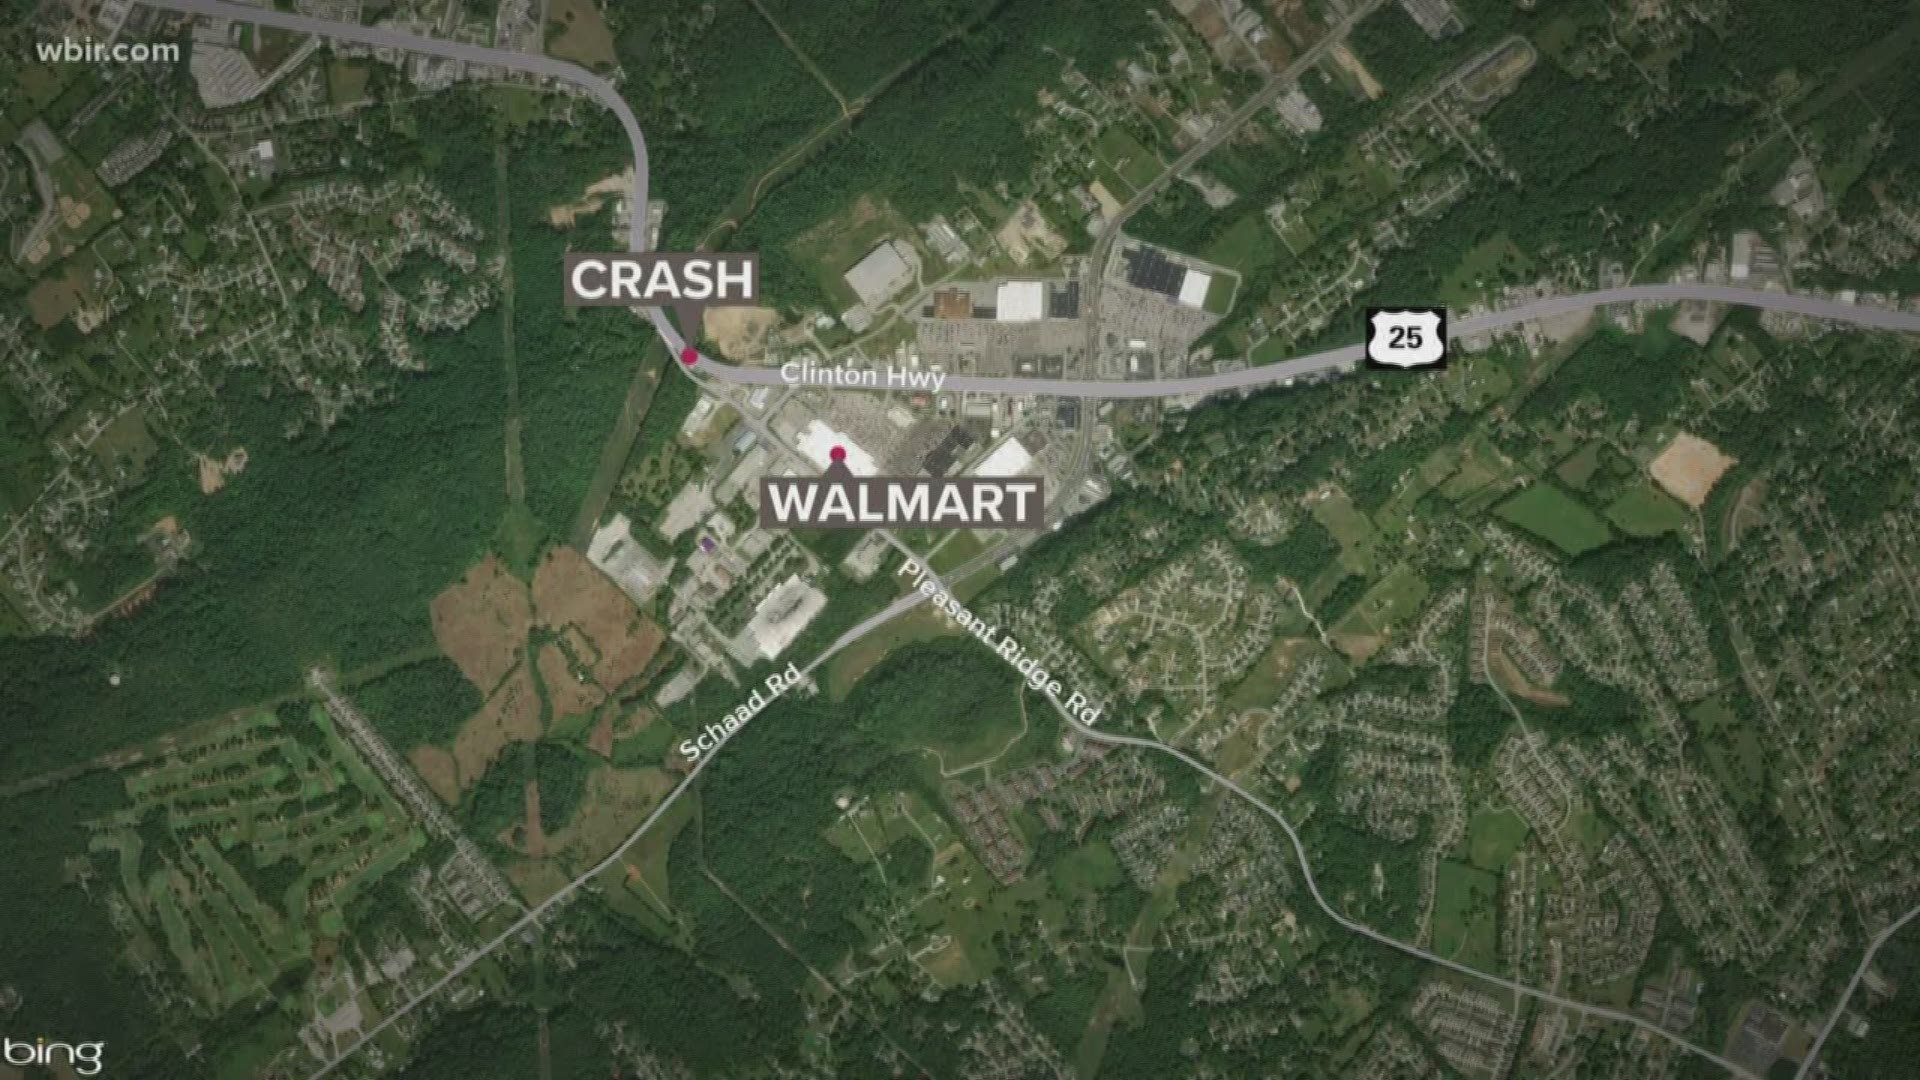 Tennessee Highway Patrol said 60-year-old Wayde West died in a Dec. 25 crash. He reportedly lost control of his motorcycle and crossed into another lane.